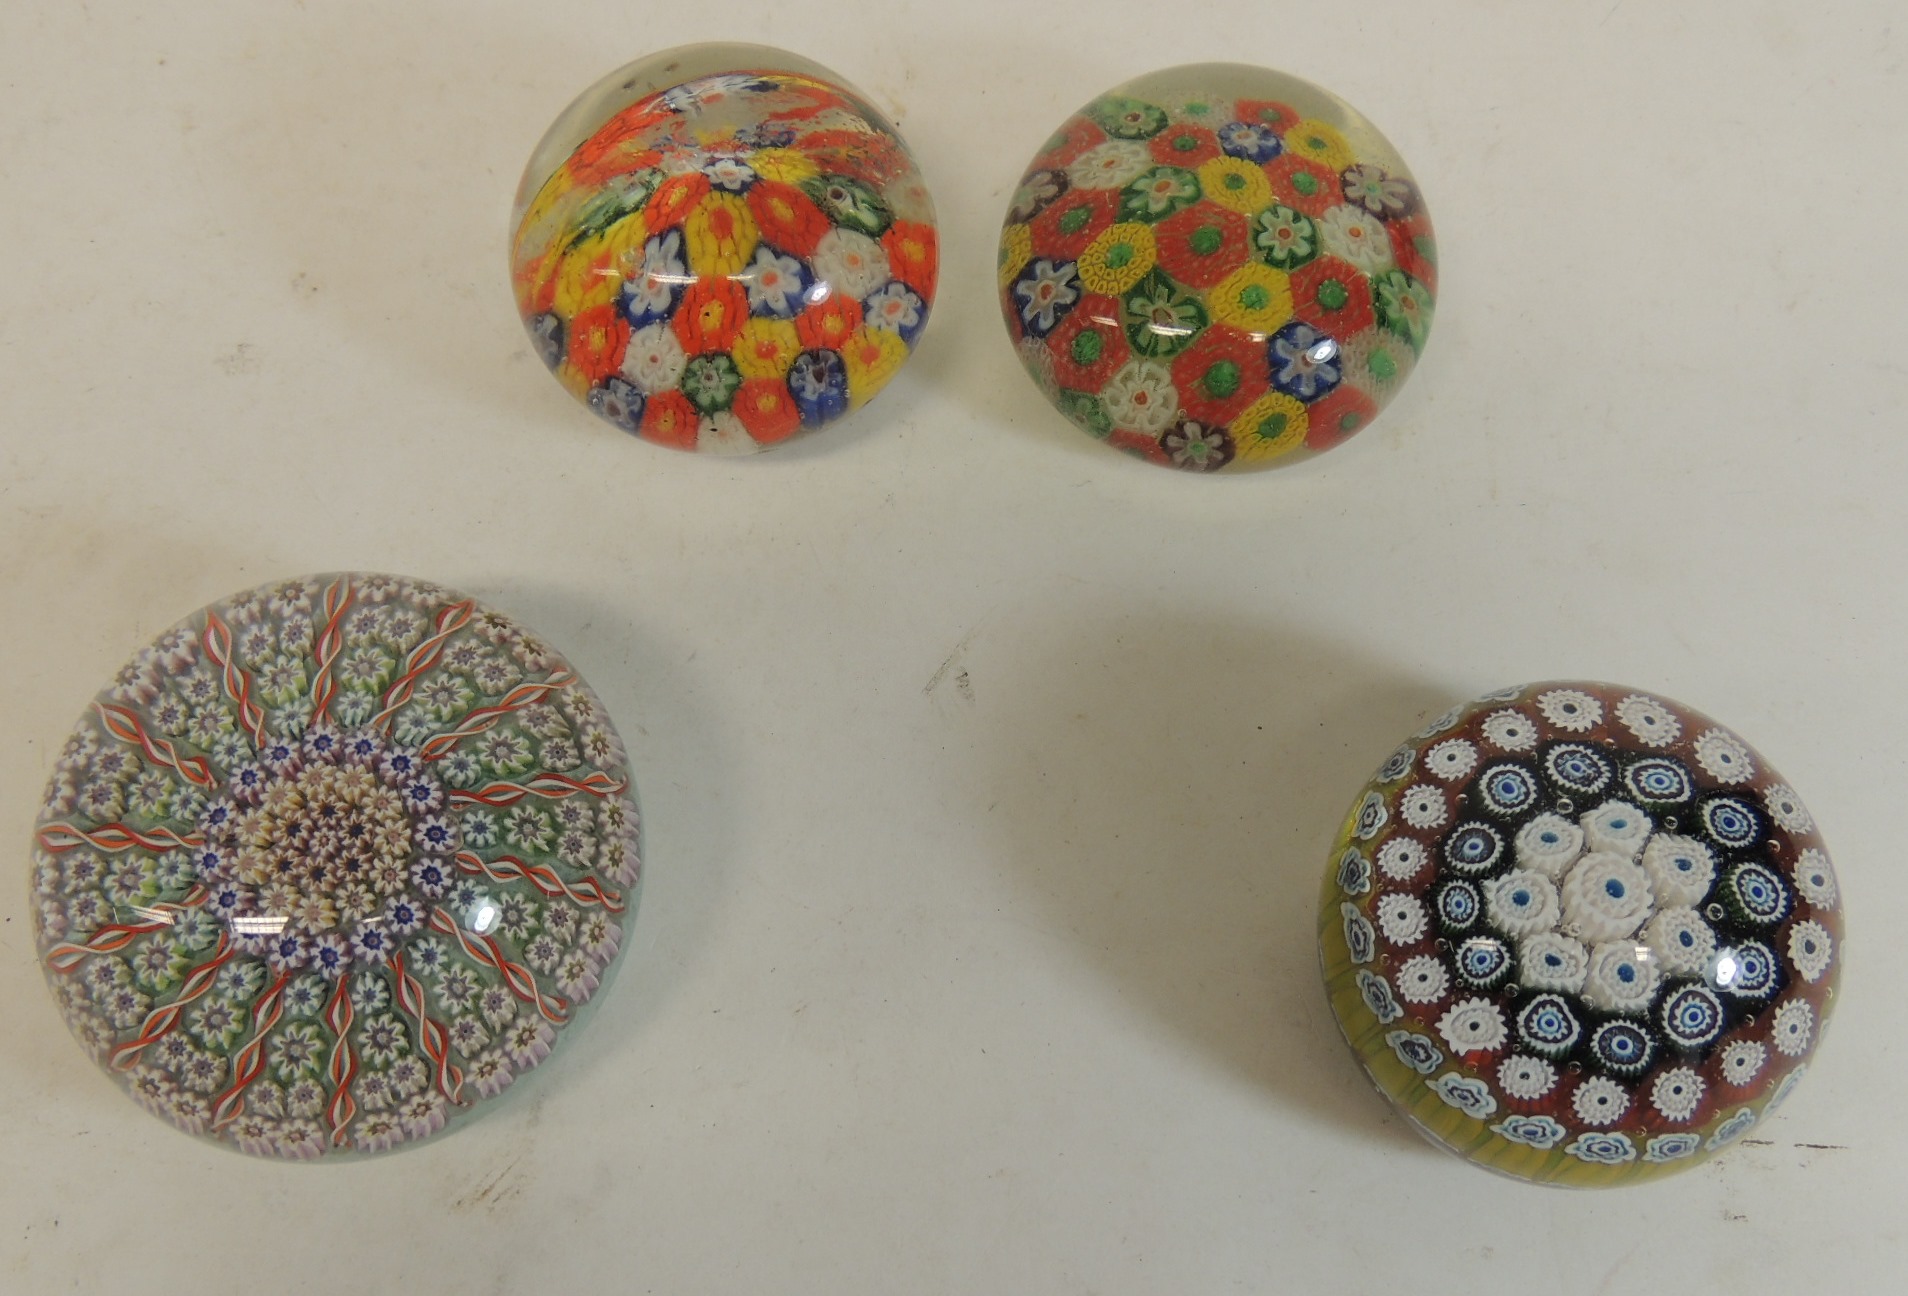 A 20th Century glass millefiori paperweight with flower head and spiral twist design; another